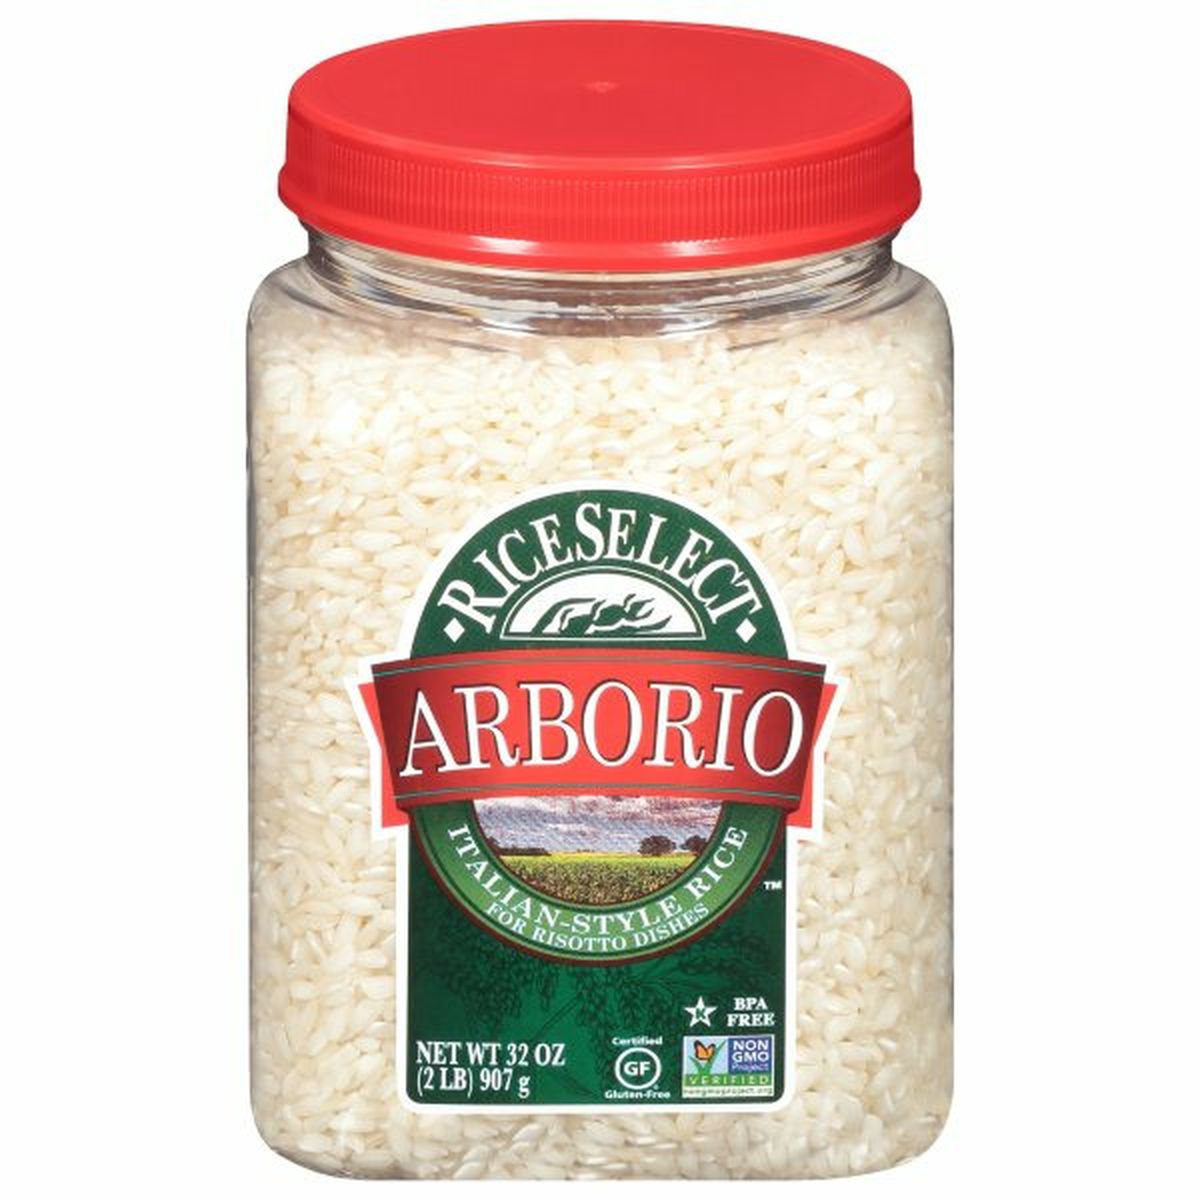 Calories in RiceSelect Rice, Arborio